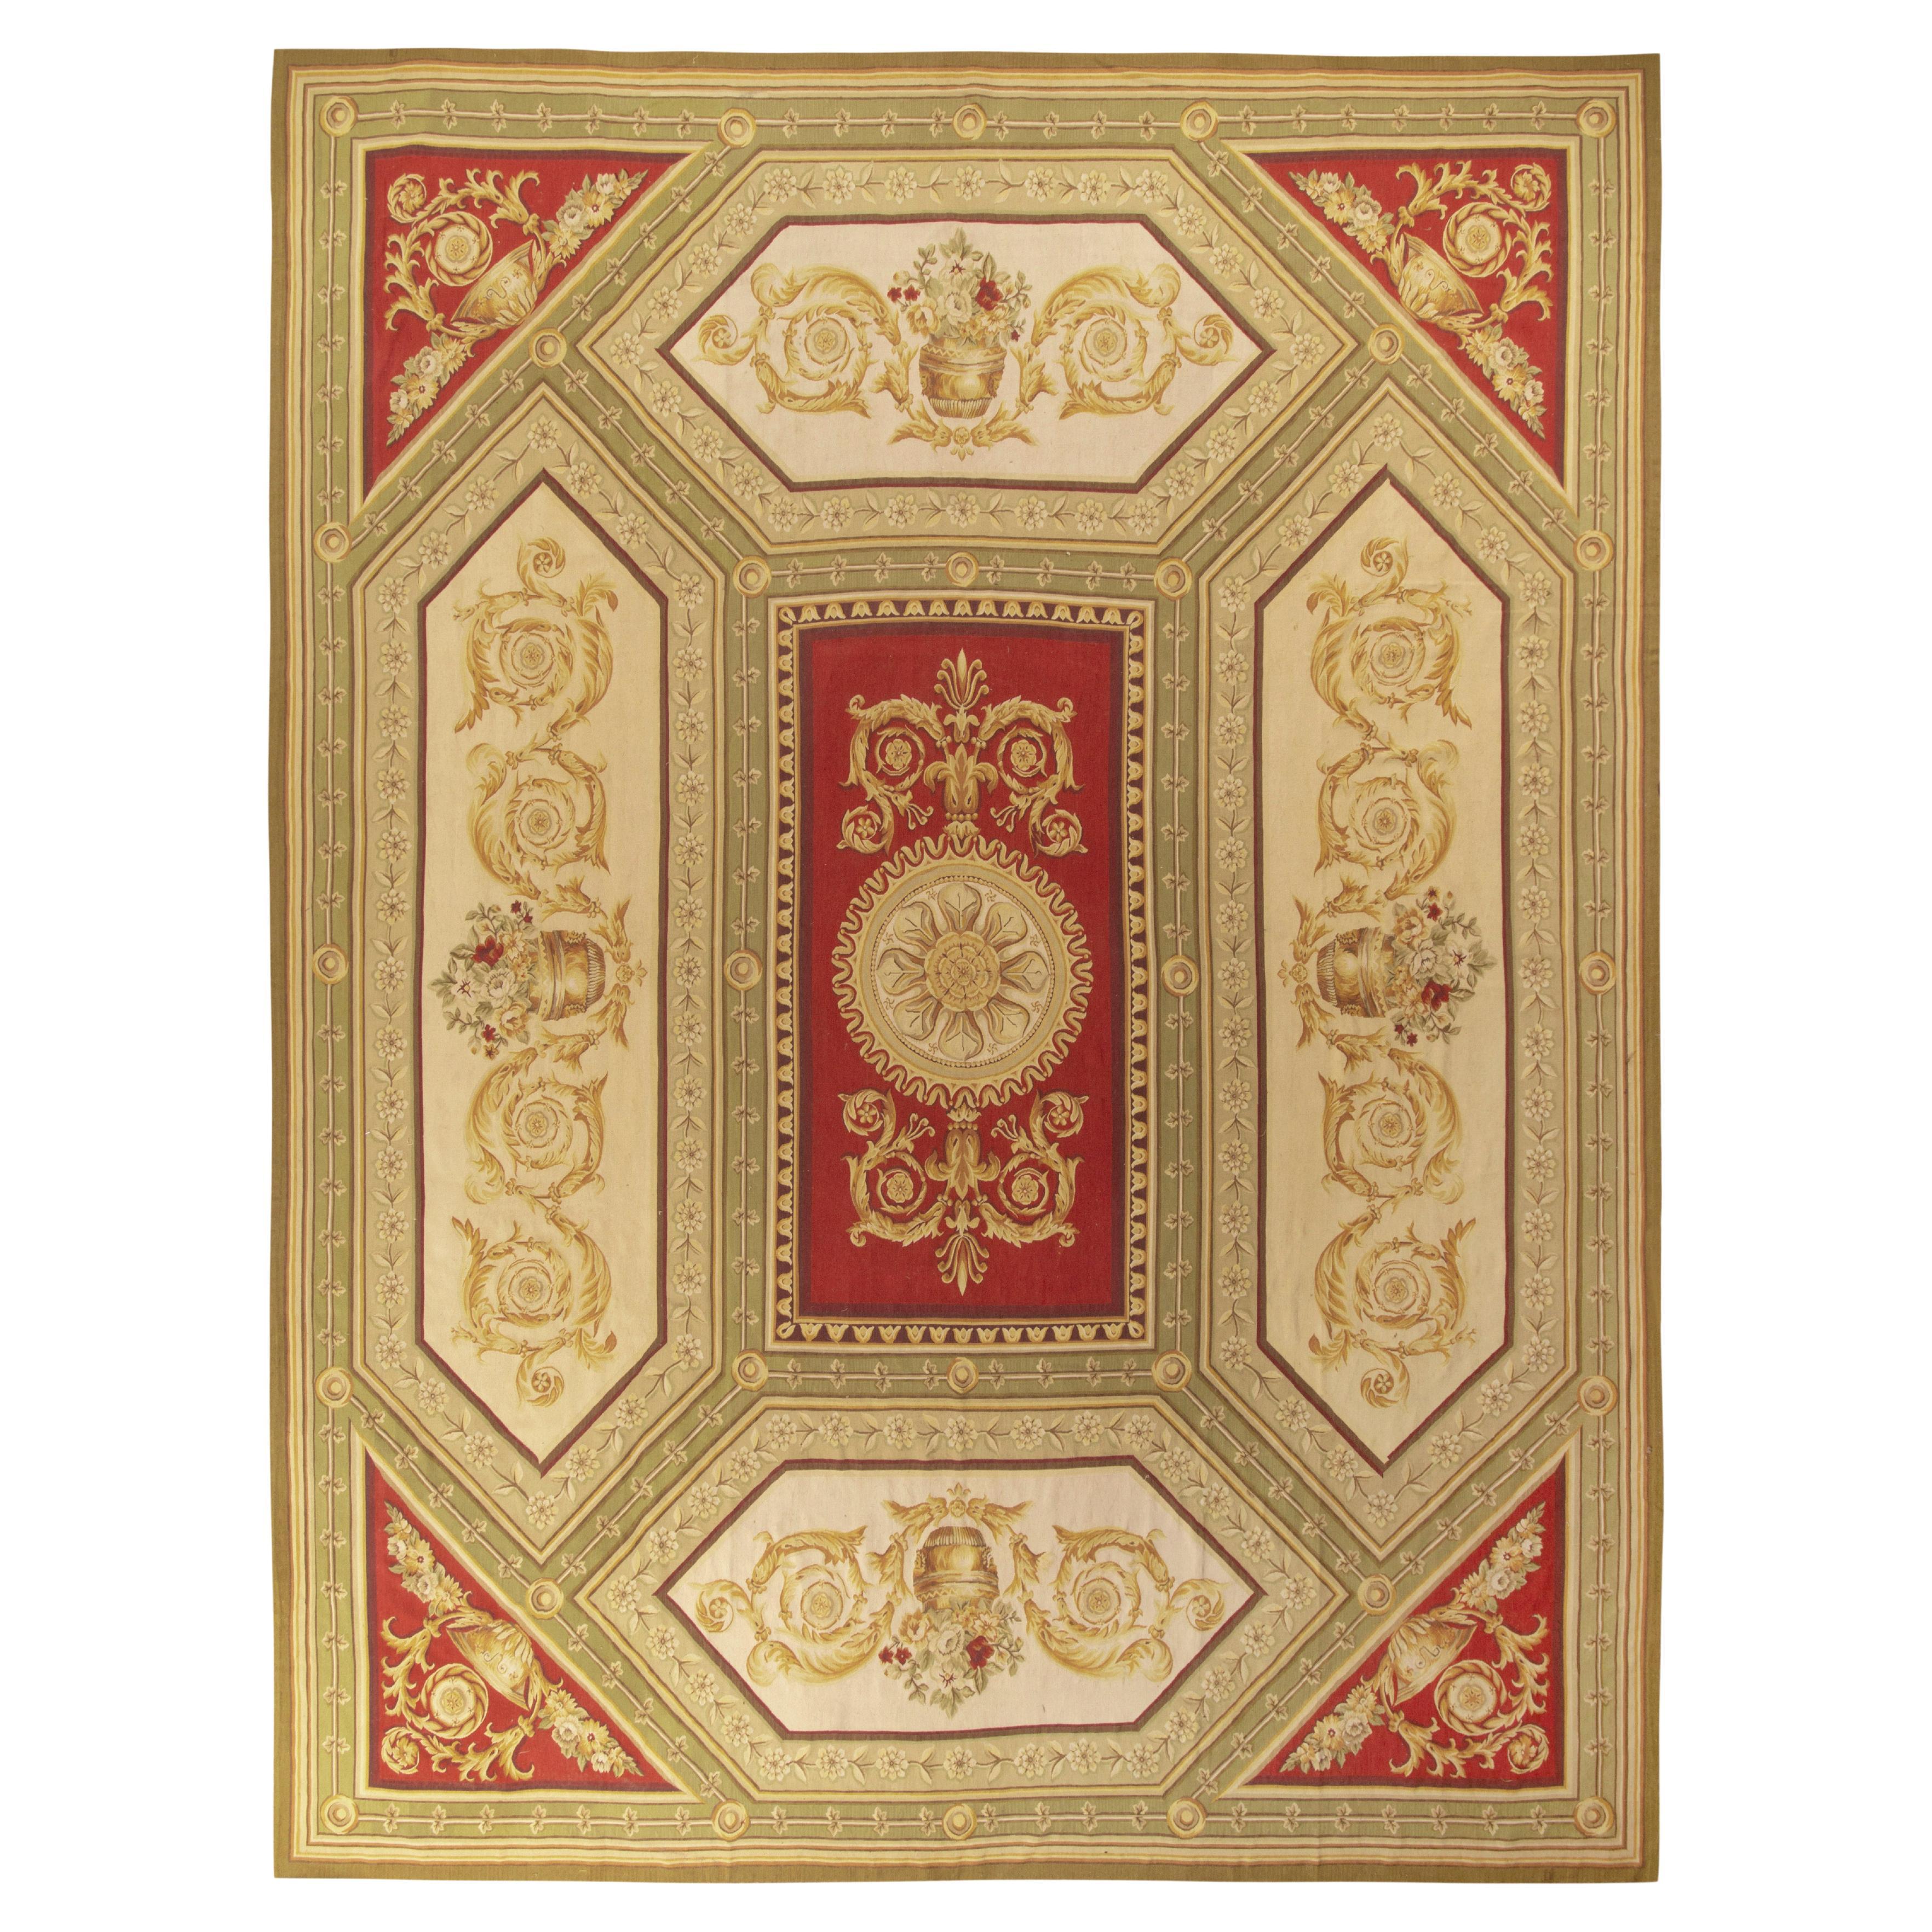 Rug & Kilim’s Aubusson Flat Weave Style Rug, Red and Green Floral Patterns